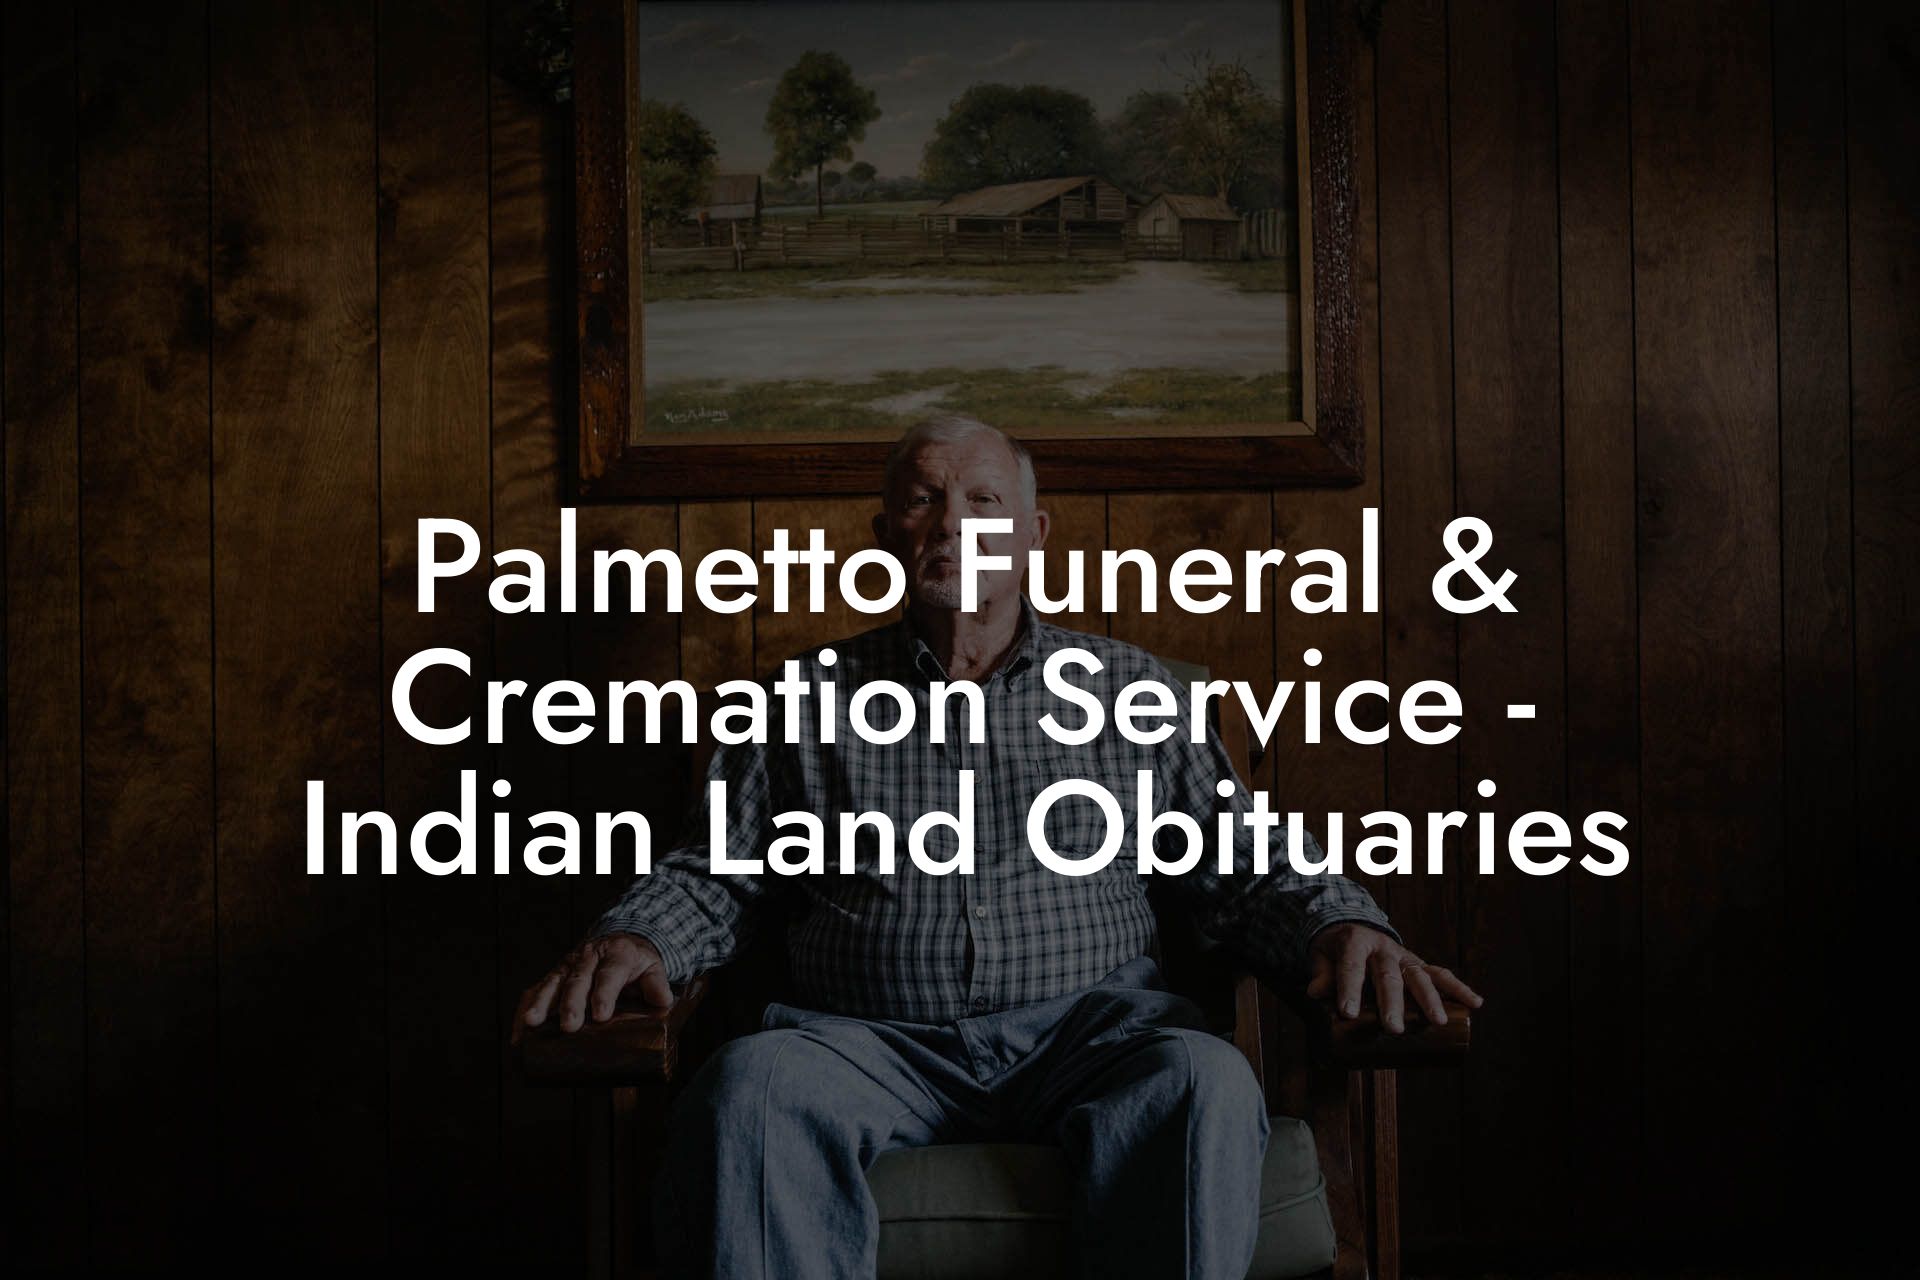 Palmetto Funeral & Cremation Service - Indian Land Obituaries